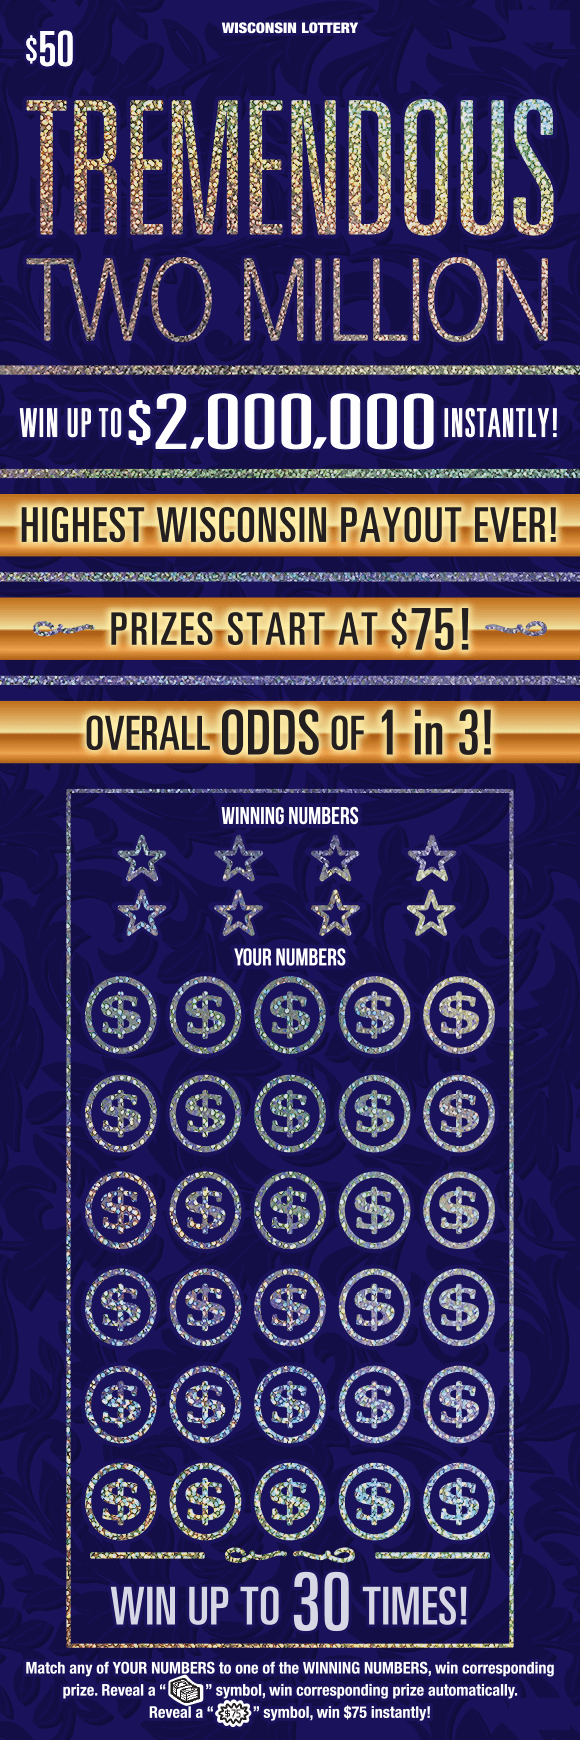 sparkly gold letters along with white and blue text and icons of dollar signs and stars on royal blue background with darker blue flourishes on Wisconsin Lottery scratch ticket